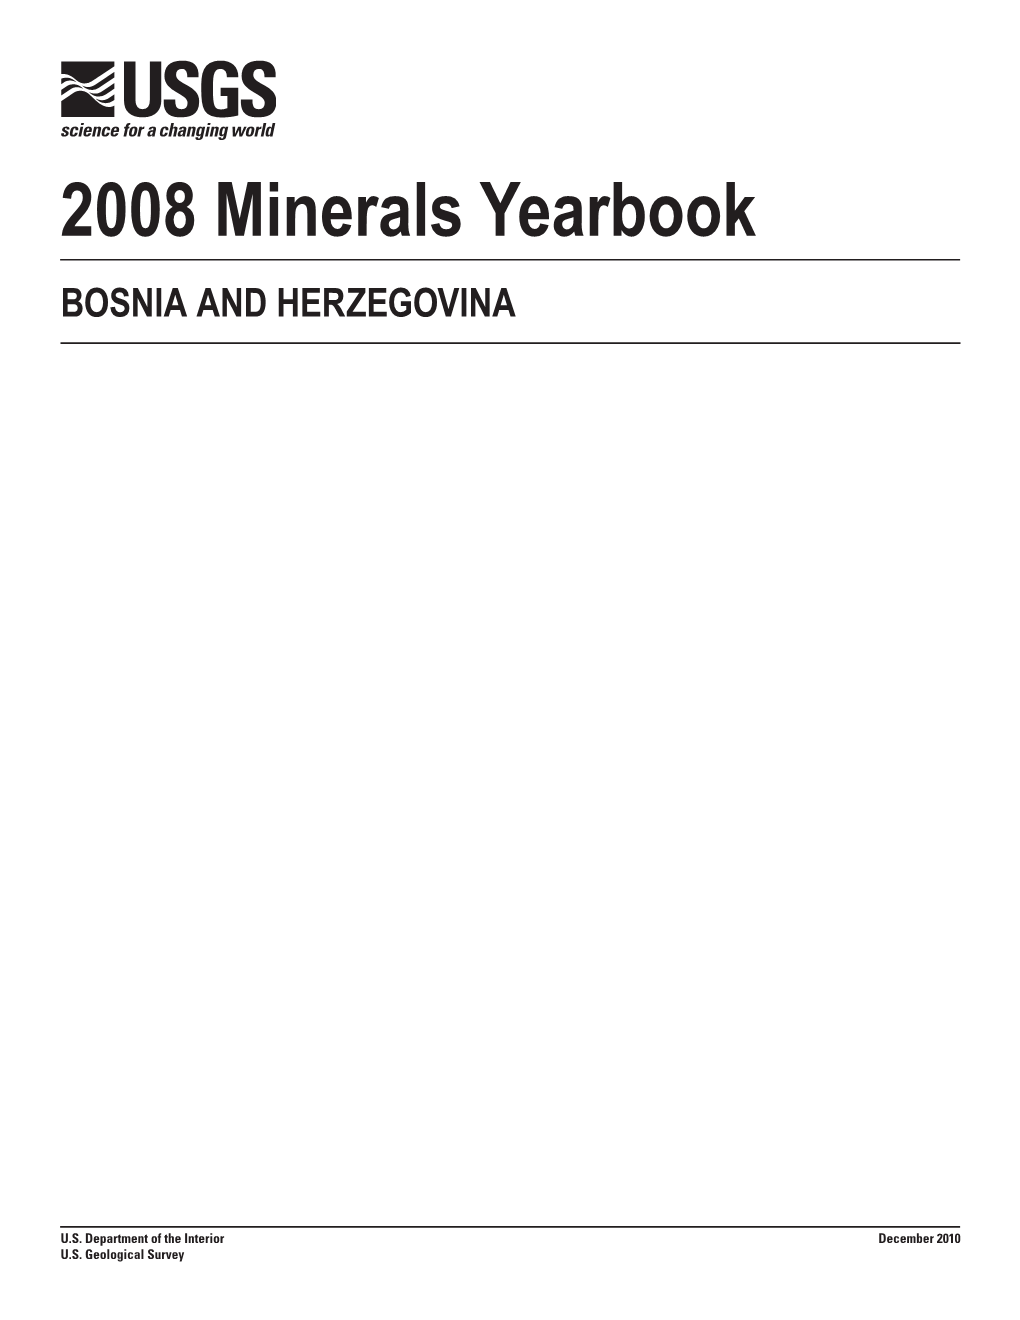 The Mineral Industry of Bosnia and Herzegovina in 2008